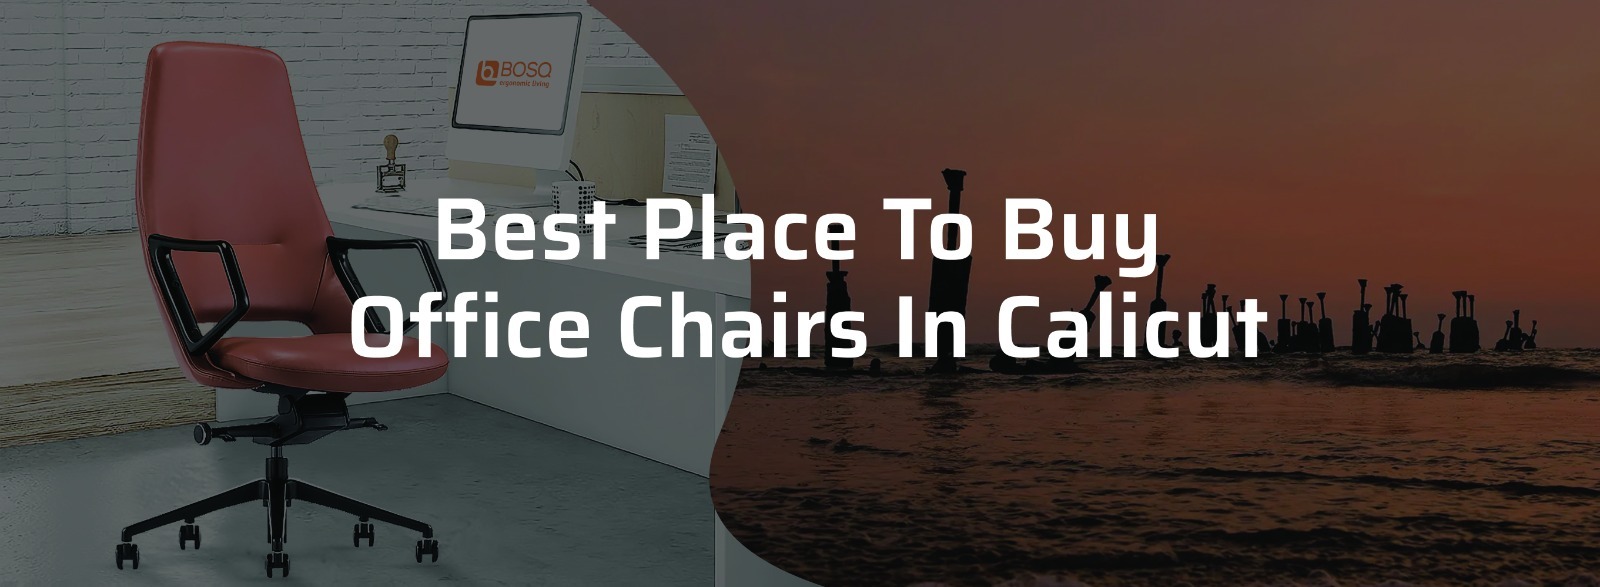 office chairs in calicut